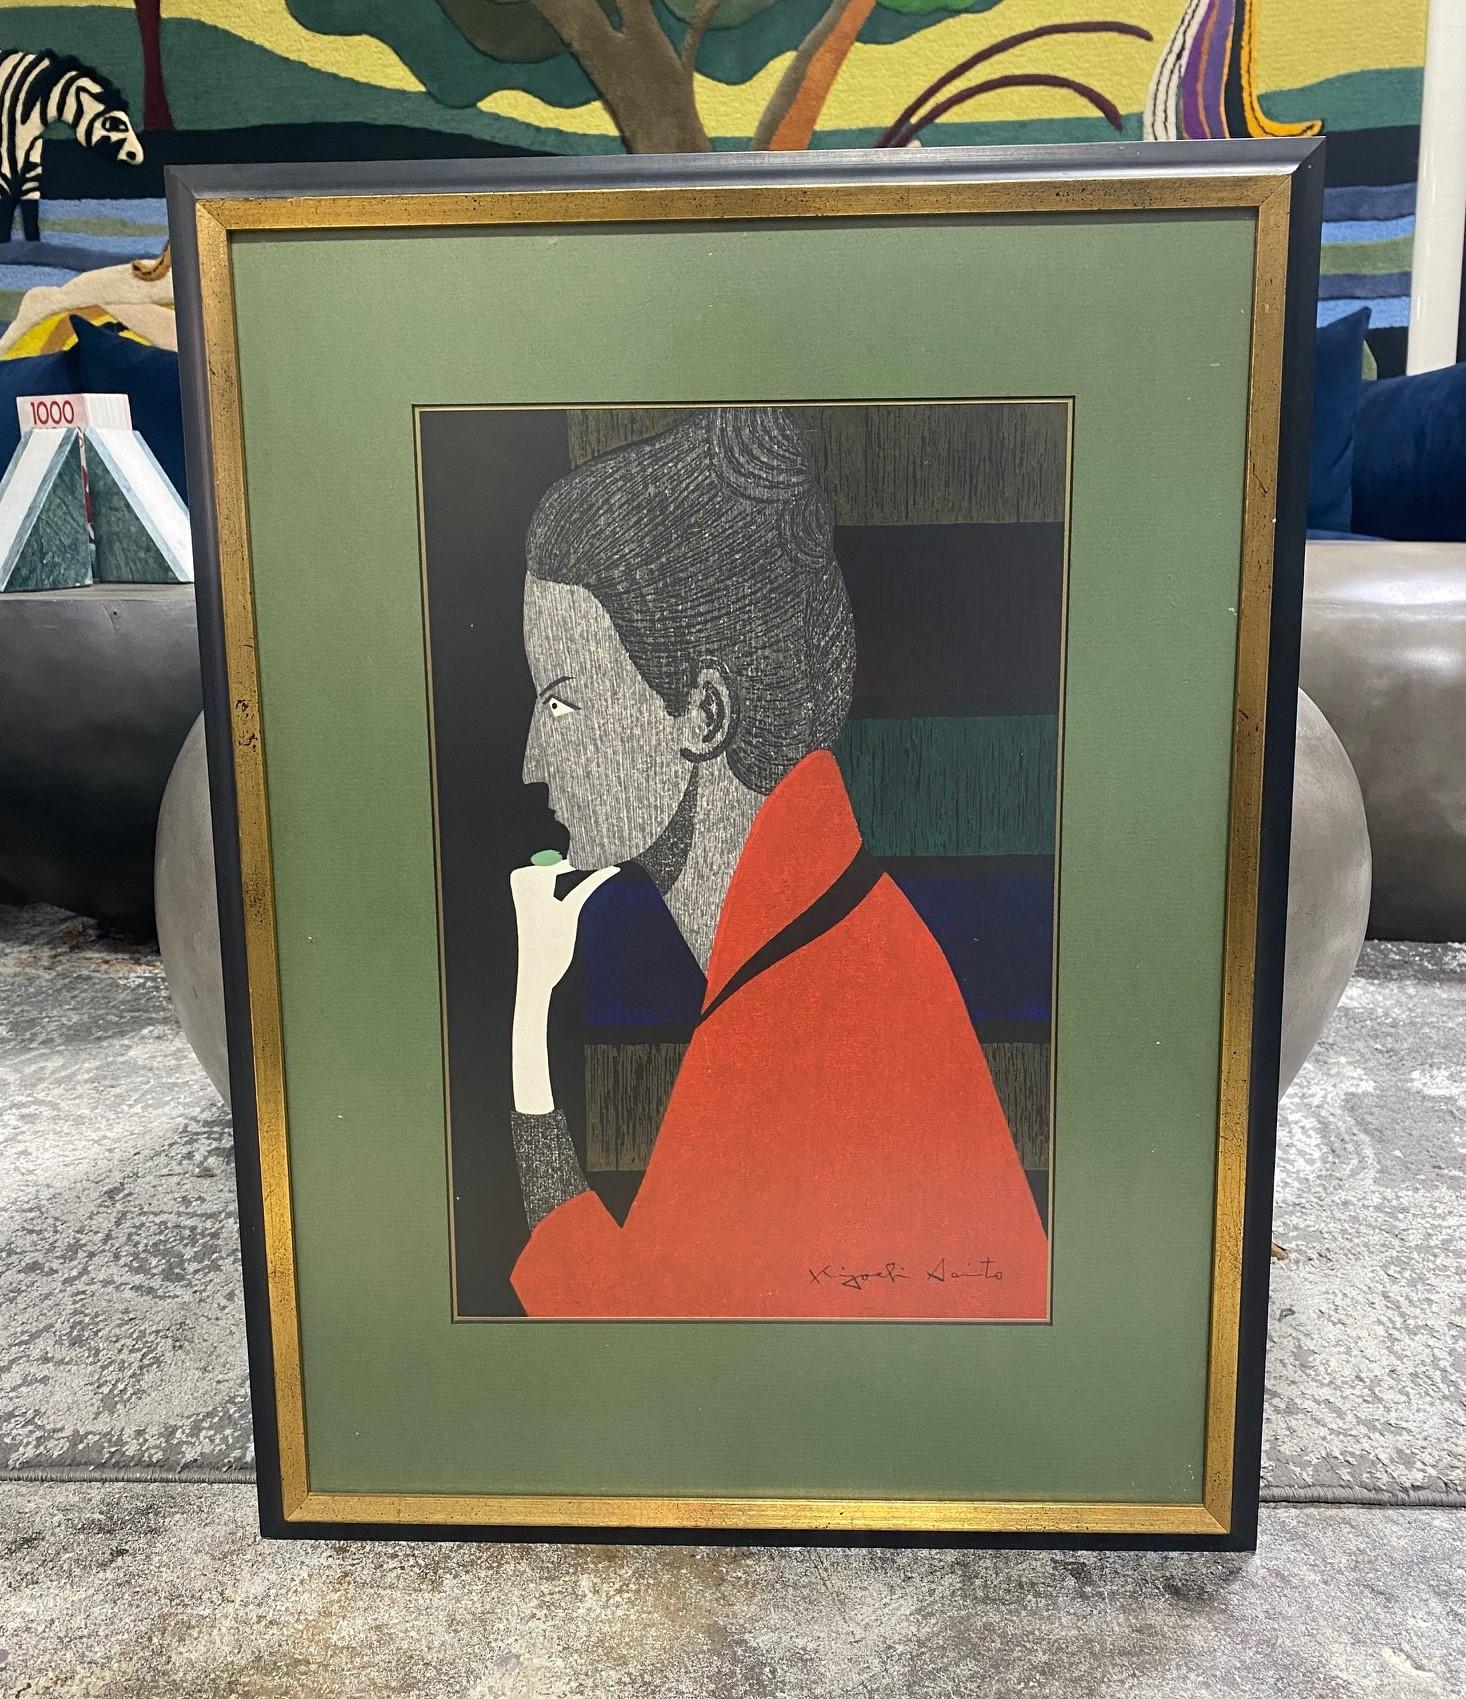 A beautifully composed and graphically gorgeous woodblock print by famed Japanese printmaker Kiyoshi Saito. Many consider Saito to be one of the most important, if not the most important, contemporary Japanese printmakers of the 20th century. This